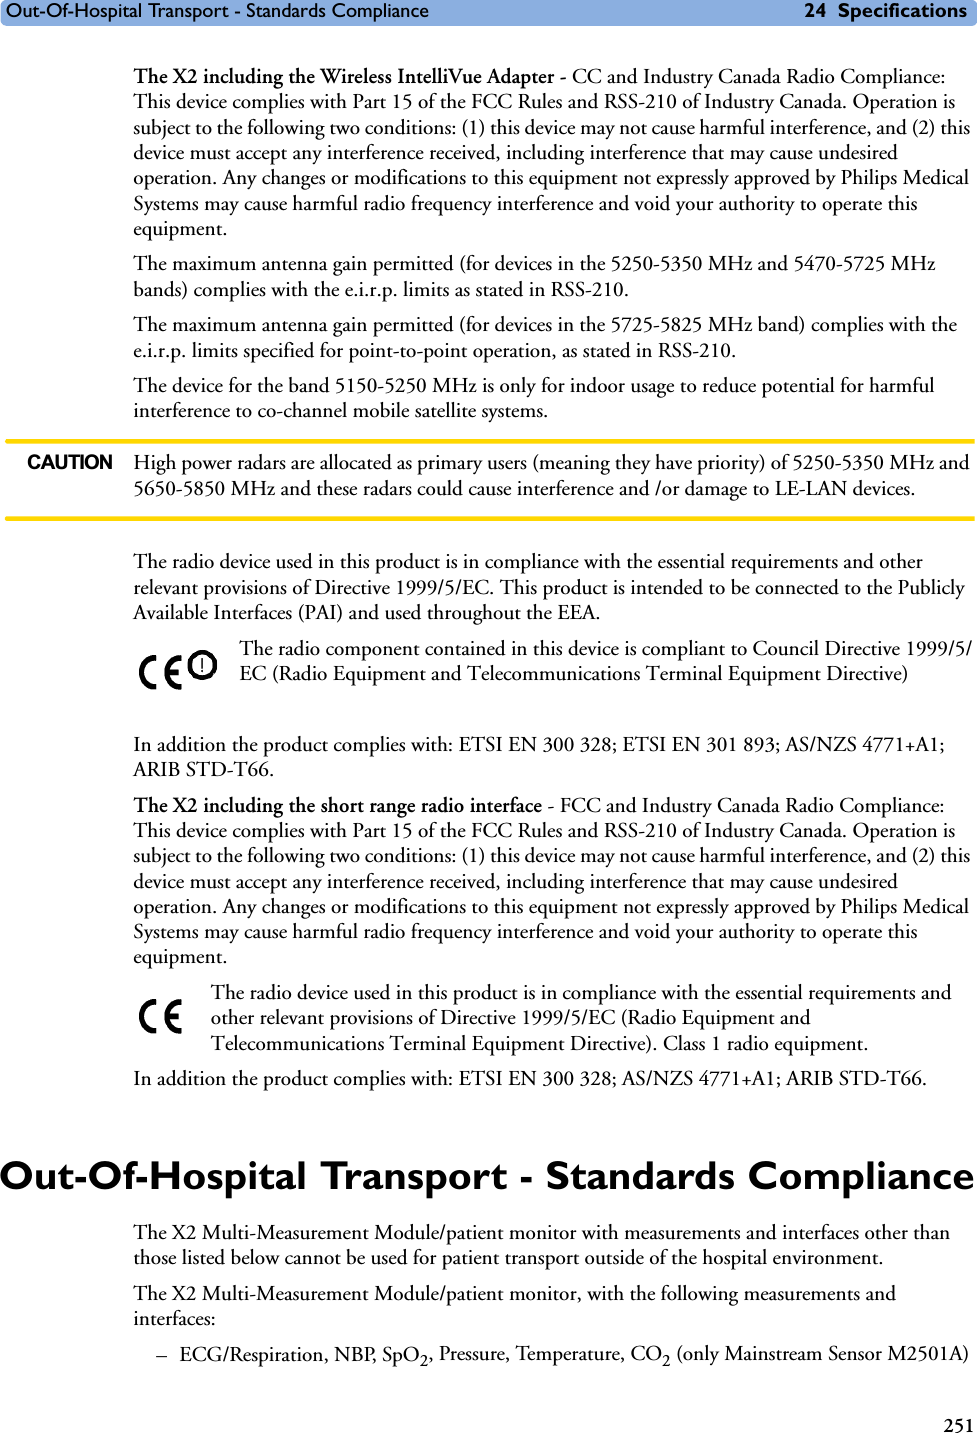 Out-Of-Hospital Transport - Standards Compliance 24 Specifications251The X2 including the Wireless IntelliVue Adapter - CC and Industry Canada Radio Compliance: This device complies with Part 15 of the FCC Rules and RSS-210 of Industry Canada. Operation is subject to the following two conditions: (1) this device may not cause harmful interference, and (2) this device must accept any interference received, including interference that may cause undesired operation. Any changes or modifications to this equipment not expressly approved by Philips Medical Systems may cause harmful radio frequency interference and void your authority to operate this equipment.The maximum antenna gain permitted (for devices in the 5250-5350 MHz and 5470-5725 MHz bands) complies with the e.i.r.p. limits as stated in RSS-210.The maximum antenna gain permitted (for devices in the 5725-5825 MHz band) complies with the e.i.r.p. limits specified for point-to-point operation, as stated in RSS-210.The device for the band 5150-5250 MHz is only for indoor usage to reduce potential for harmful interference to co-channel mobile satellite systems.CAUTION High power radars are allocated as primary users (meaning they have priority) of 5250-5350 MHz and 5650-5850 MHz and these radars could cause interference and /or damage to LE-LAN devices.The radio device used in this product is in compliance with the essential requirements and other relevant provisions of Directive 1999/5/EC. This product is intended to be connected to the Publicly Available Interfaces (PAI) and used throughout the EEA.The radio component contained in this device is compliant to Council Directive 1999/5/EC (Radio Equipment and Telecommunications Terminal Equipment Directive)In addition the product complies with: ETSI EN 300 328; ETSI EN 301 893; AS/NZS 4771+A1; ARIB STD-T66.The X2 including the short range radio interface - FCC and Industry Canada Radio Compliance: This device complies with Part 15 of the FCC Rules and RSS-210 of Industry Canada. Operation is subject to the following two conditions: (1) this device may not cause harmful interference, and (2) this device must accept any interference received, including interference that may cause undesired operation. Any changes or modifications to this equipment not expressly approved by Philips Medical Systems may cause harmful radio frequency interference and void your authority to operate this equipment.The radio device used in this product is in compliance with the essential requirements and other relevant provisions of Directive 1999/5/EC (Radio Equipment and Telecommunications Terminal Equipment Directive). Class 1 radio equipment. In addition the product complies with: ETSI EN 300 328; AS/NZS 4771+A1; ARIB STD-T66.Out-Of-Hospital Transport - Standards ComplianceThe X2 Multi-Measurement Module/patient monitor with measurements and interfaces other than those listed below cannot be used for patient transport outside of the hospital environment.The X2 Multi-Measurement Module/patient monitor, with the following measurements and interfaces: –ECG/Respiration, NBP, SpO2, Pressure, Temperature, CO2 (only Mainstream Sensor M2501A)